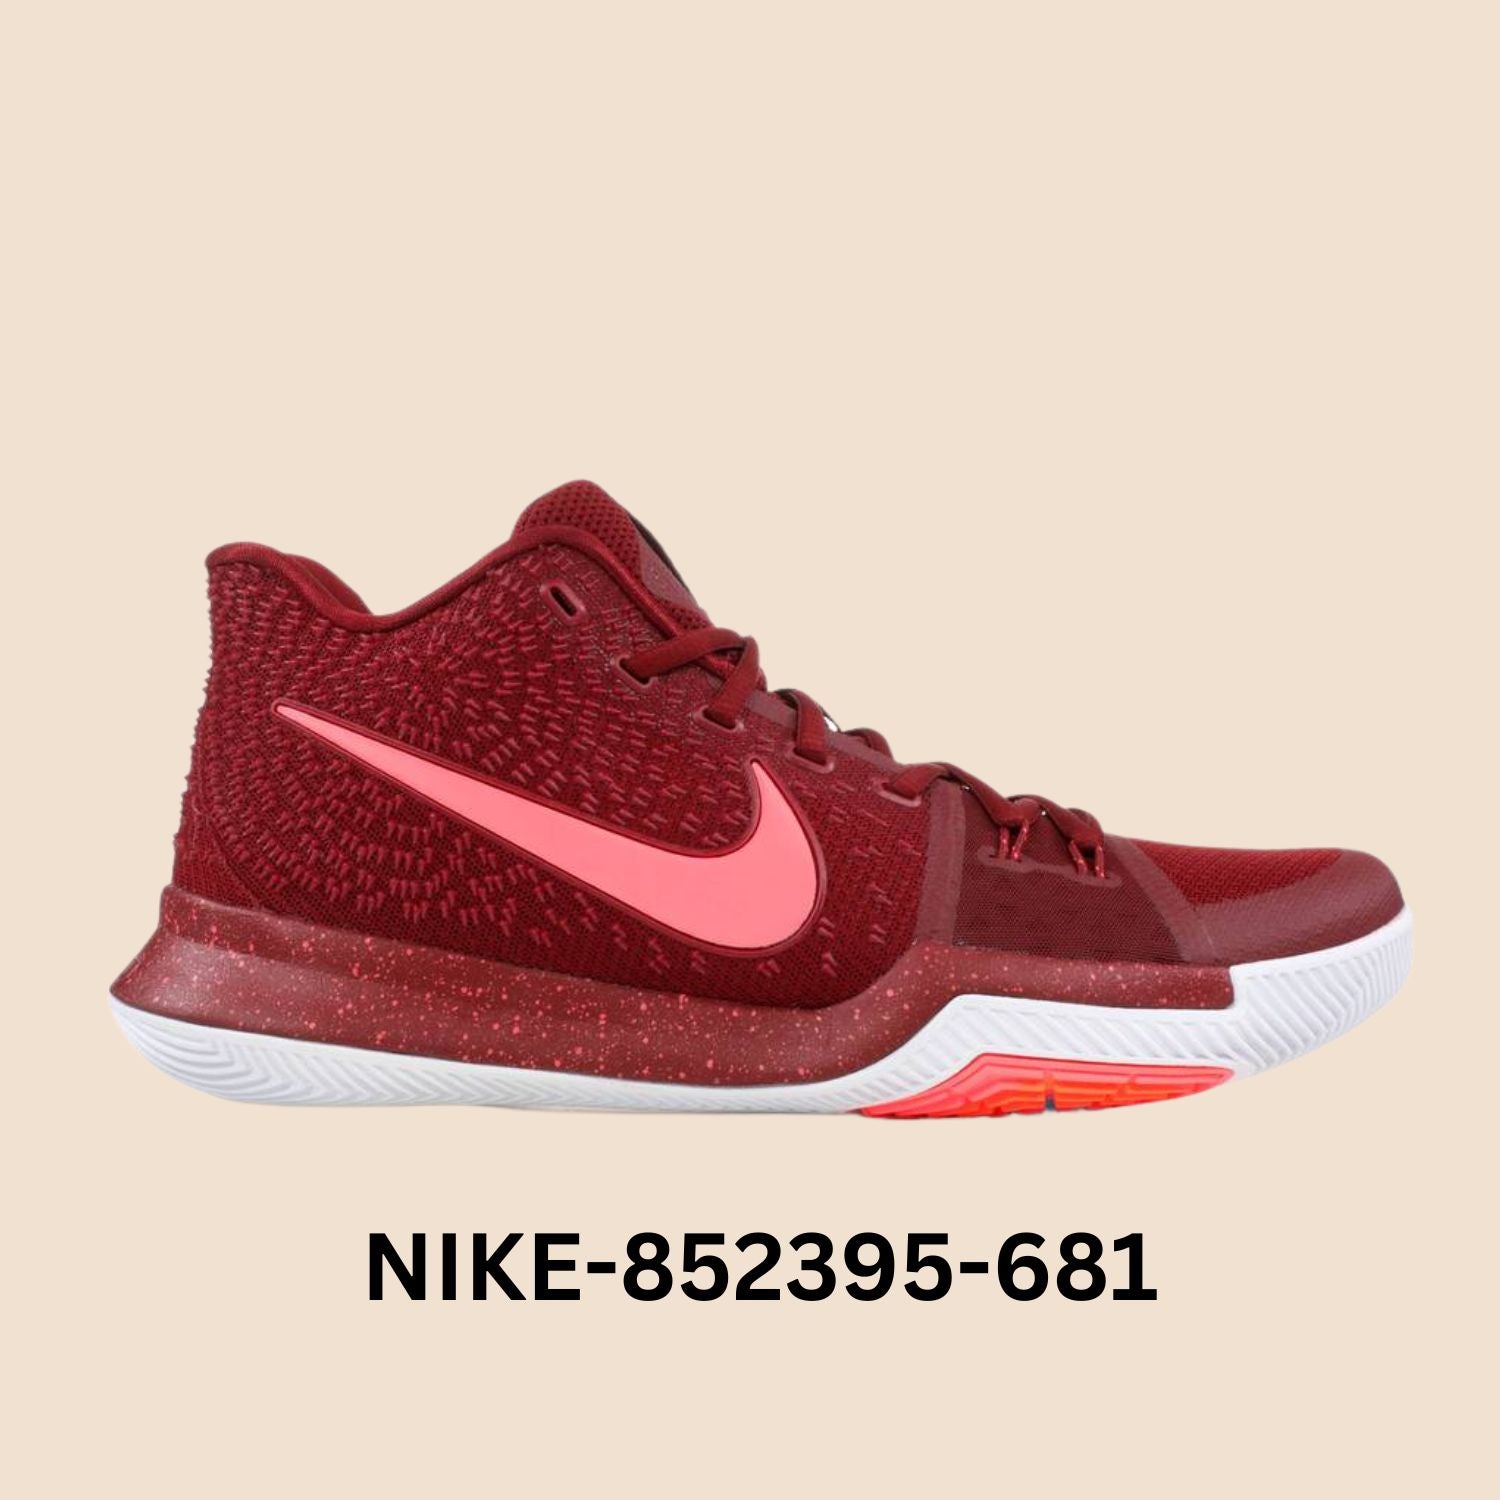 Nike Kyrie 3 "Hot Punch" Men's  Style# 852395-681